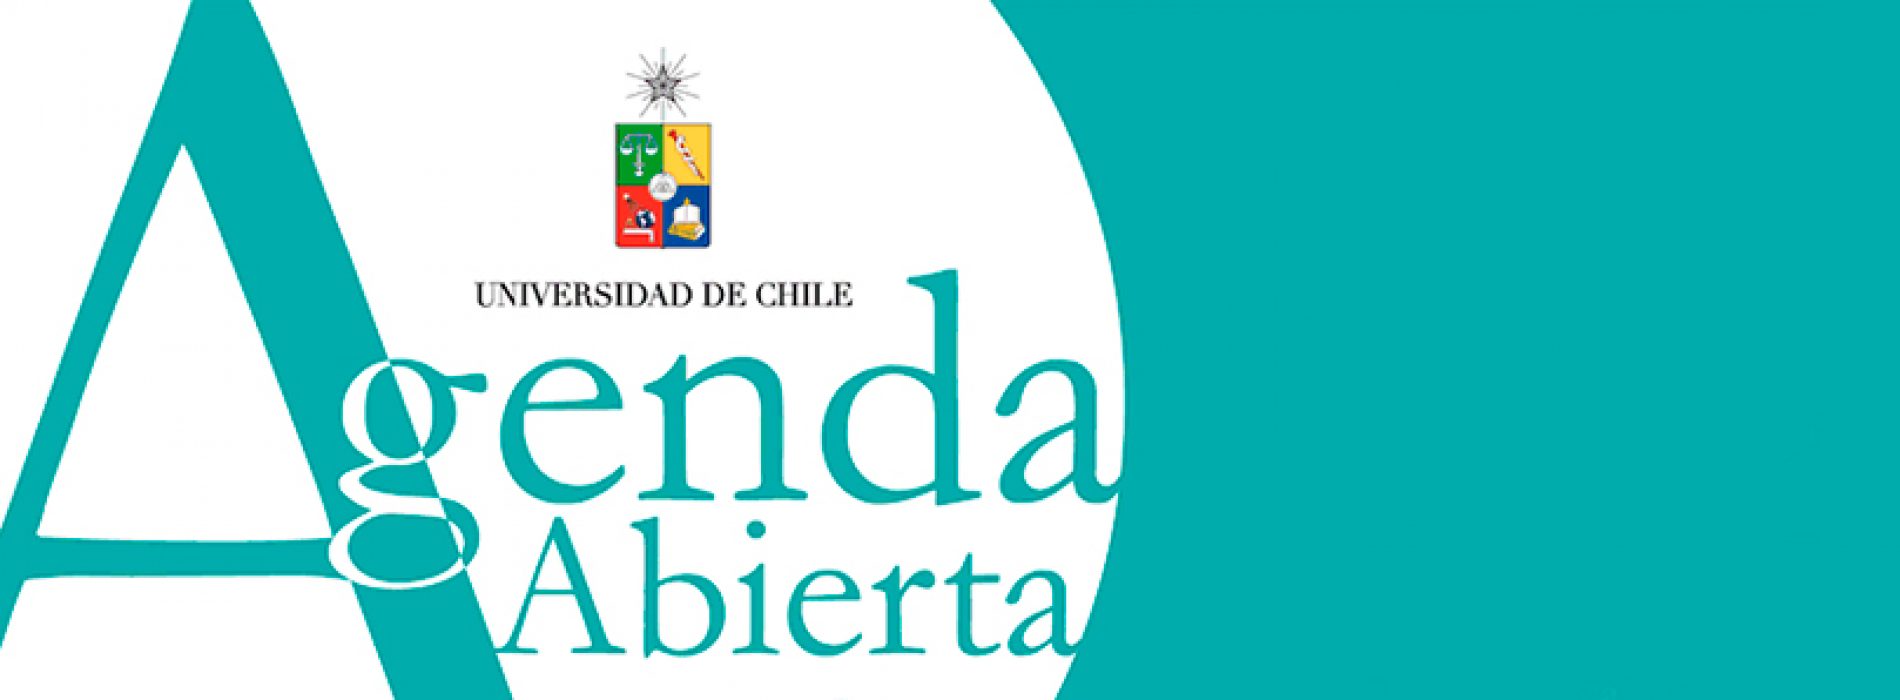 "The Chile invites". Check out their activities in December